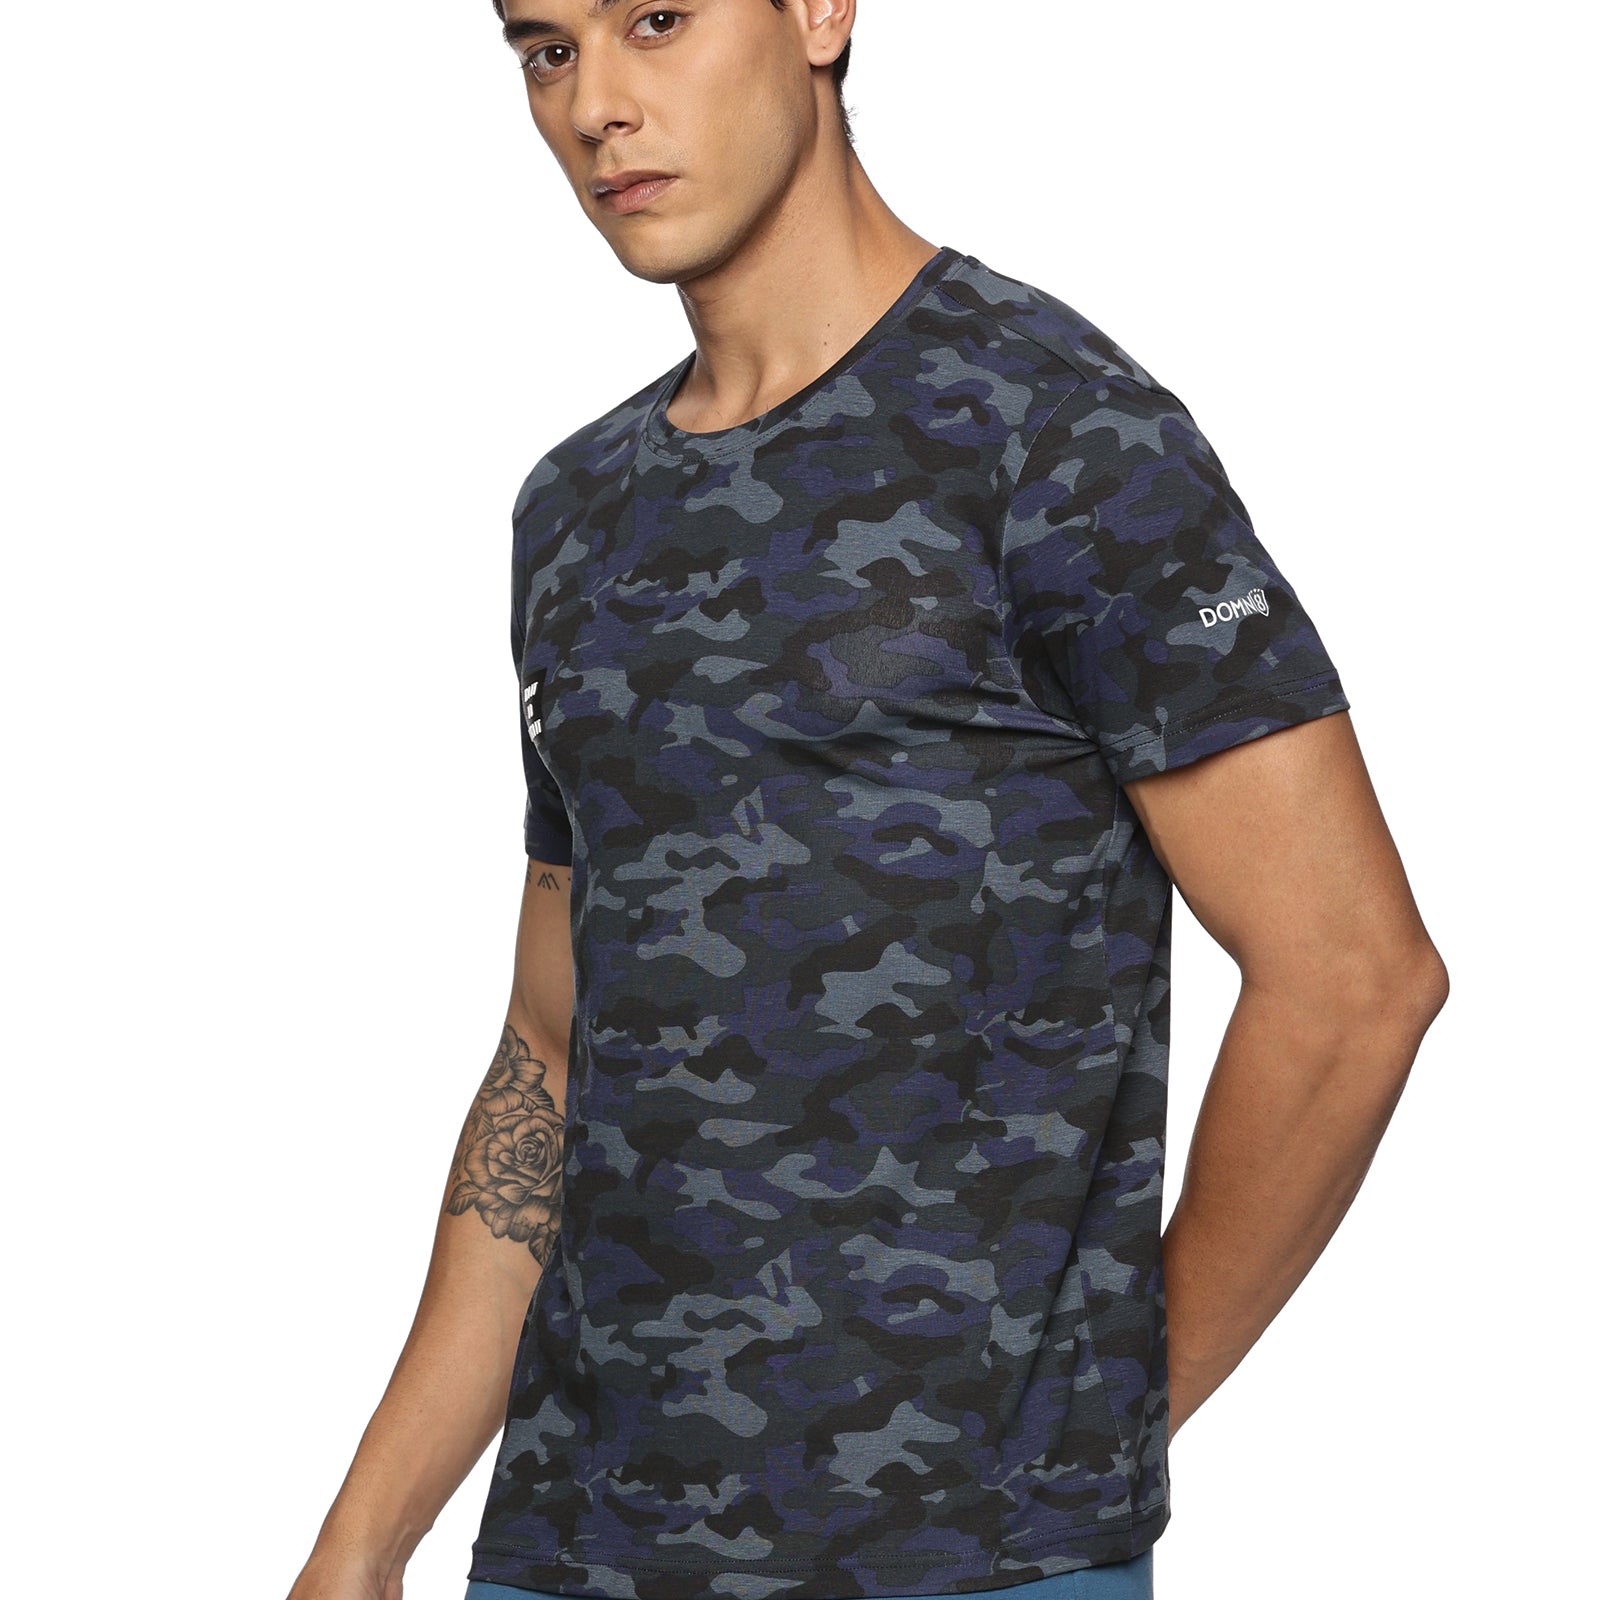 Men's Camouflage Outdoor T-Shirt for Running/Training/ Gym workout/sports